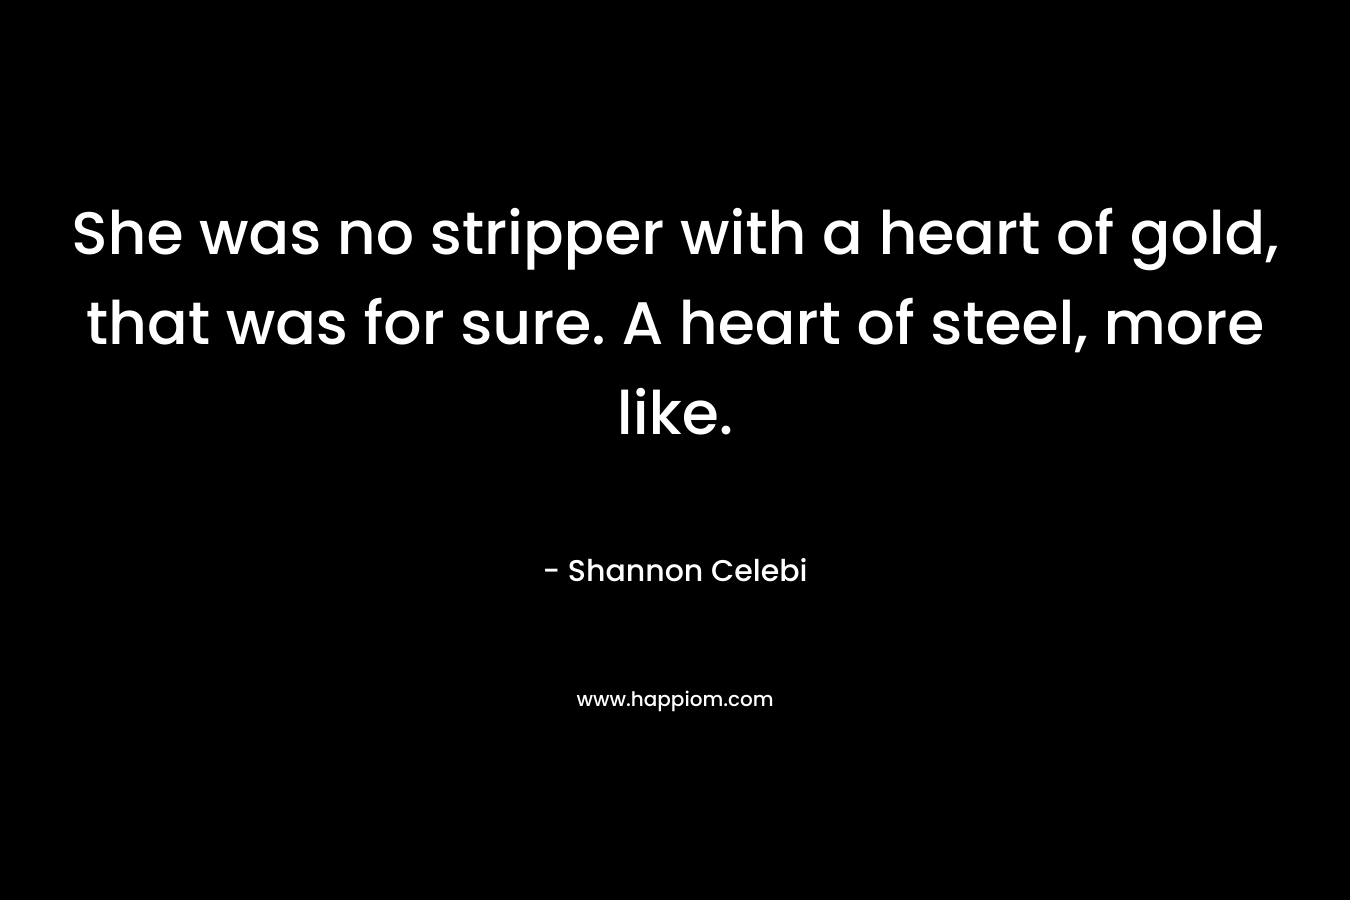 She was no stripper with a heart of gold, that was for sure. A heart of steel, more like.